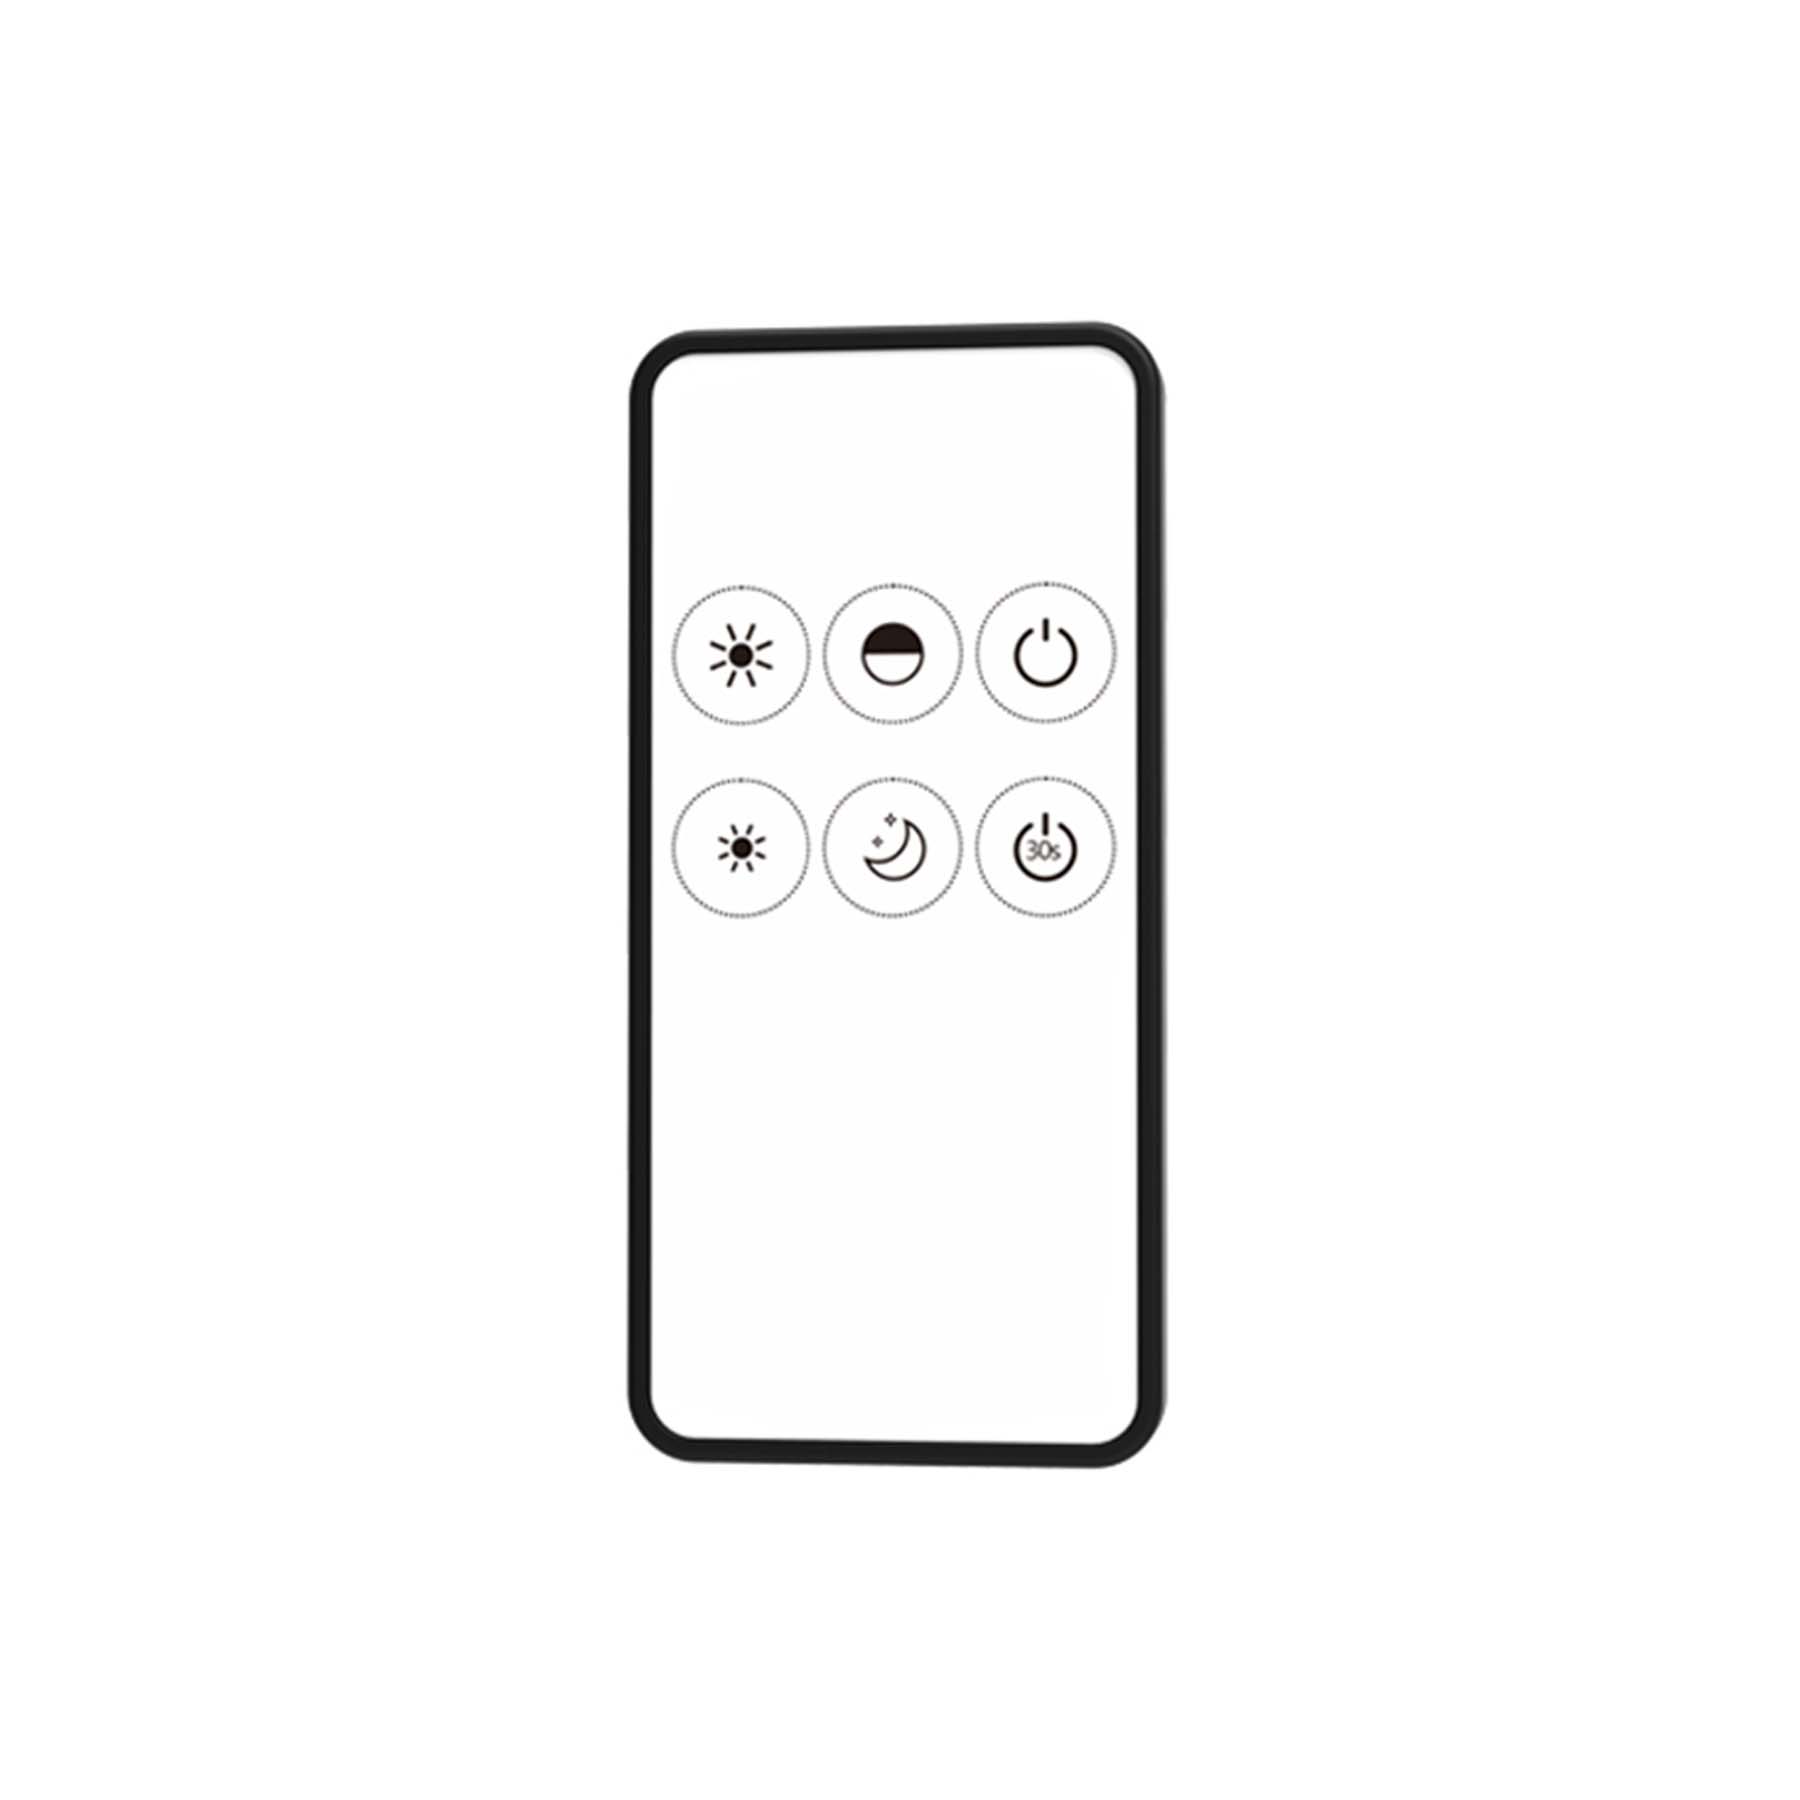 G.W.S. LED LED 12-48V DC Dimming Controller V1-L + 1 Zone Remote Control RM1